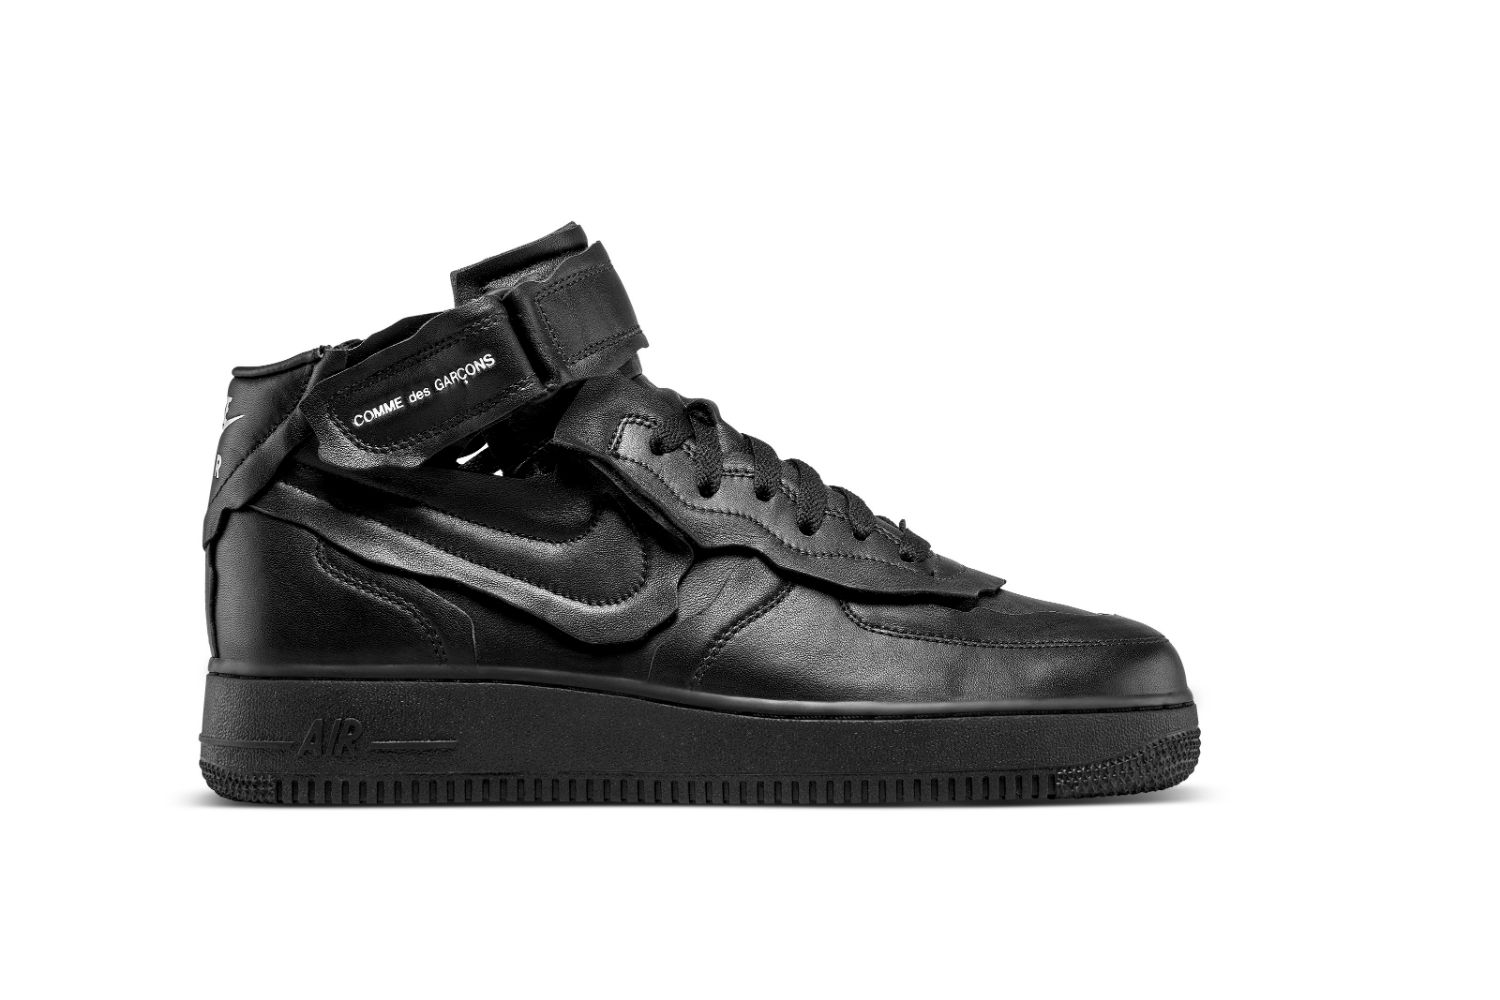 Nike and Comme Des Garcons Return With the Air Force 1 Mid